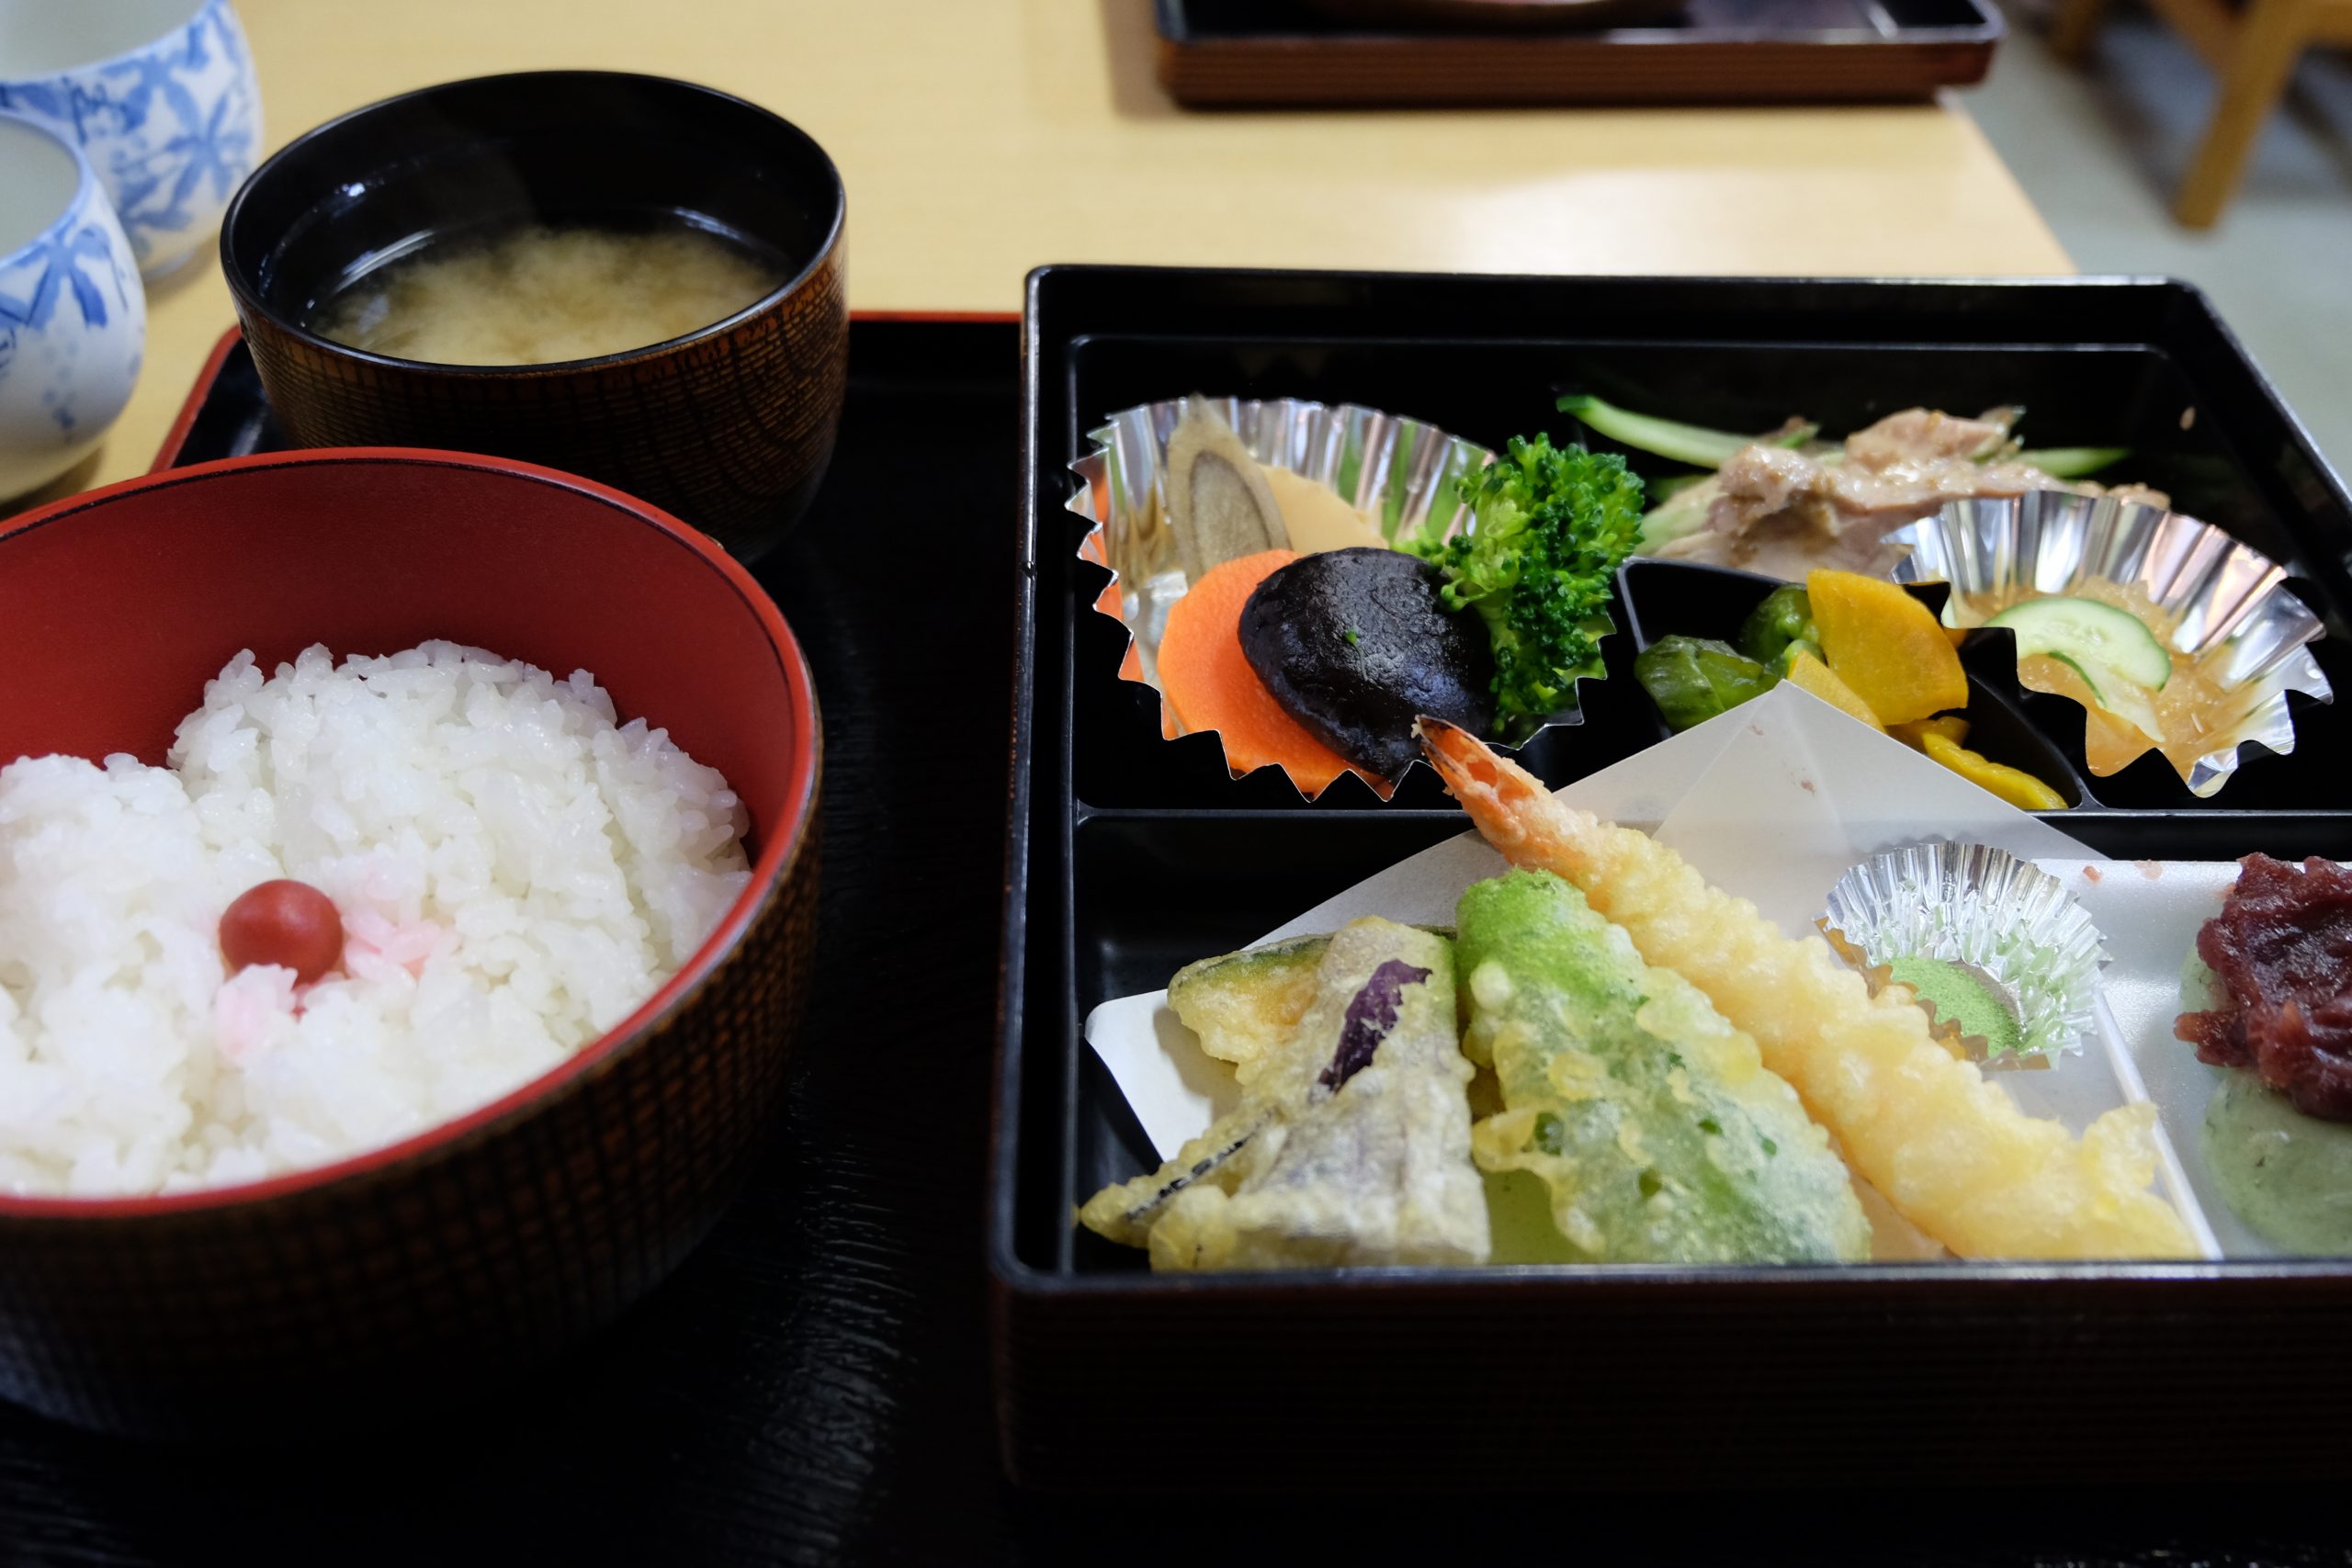 Eating a bento box for lunch in Japan